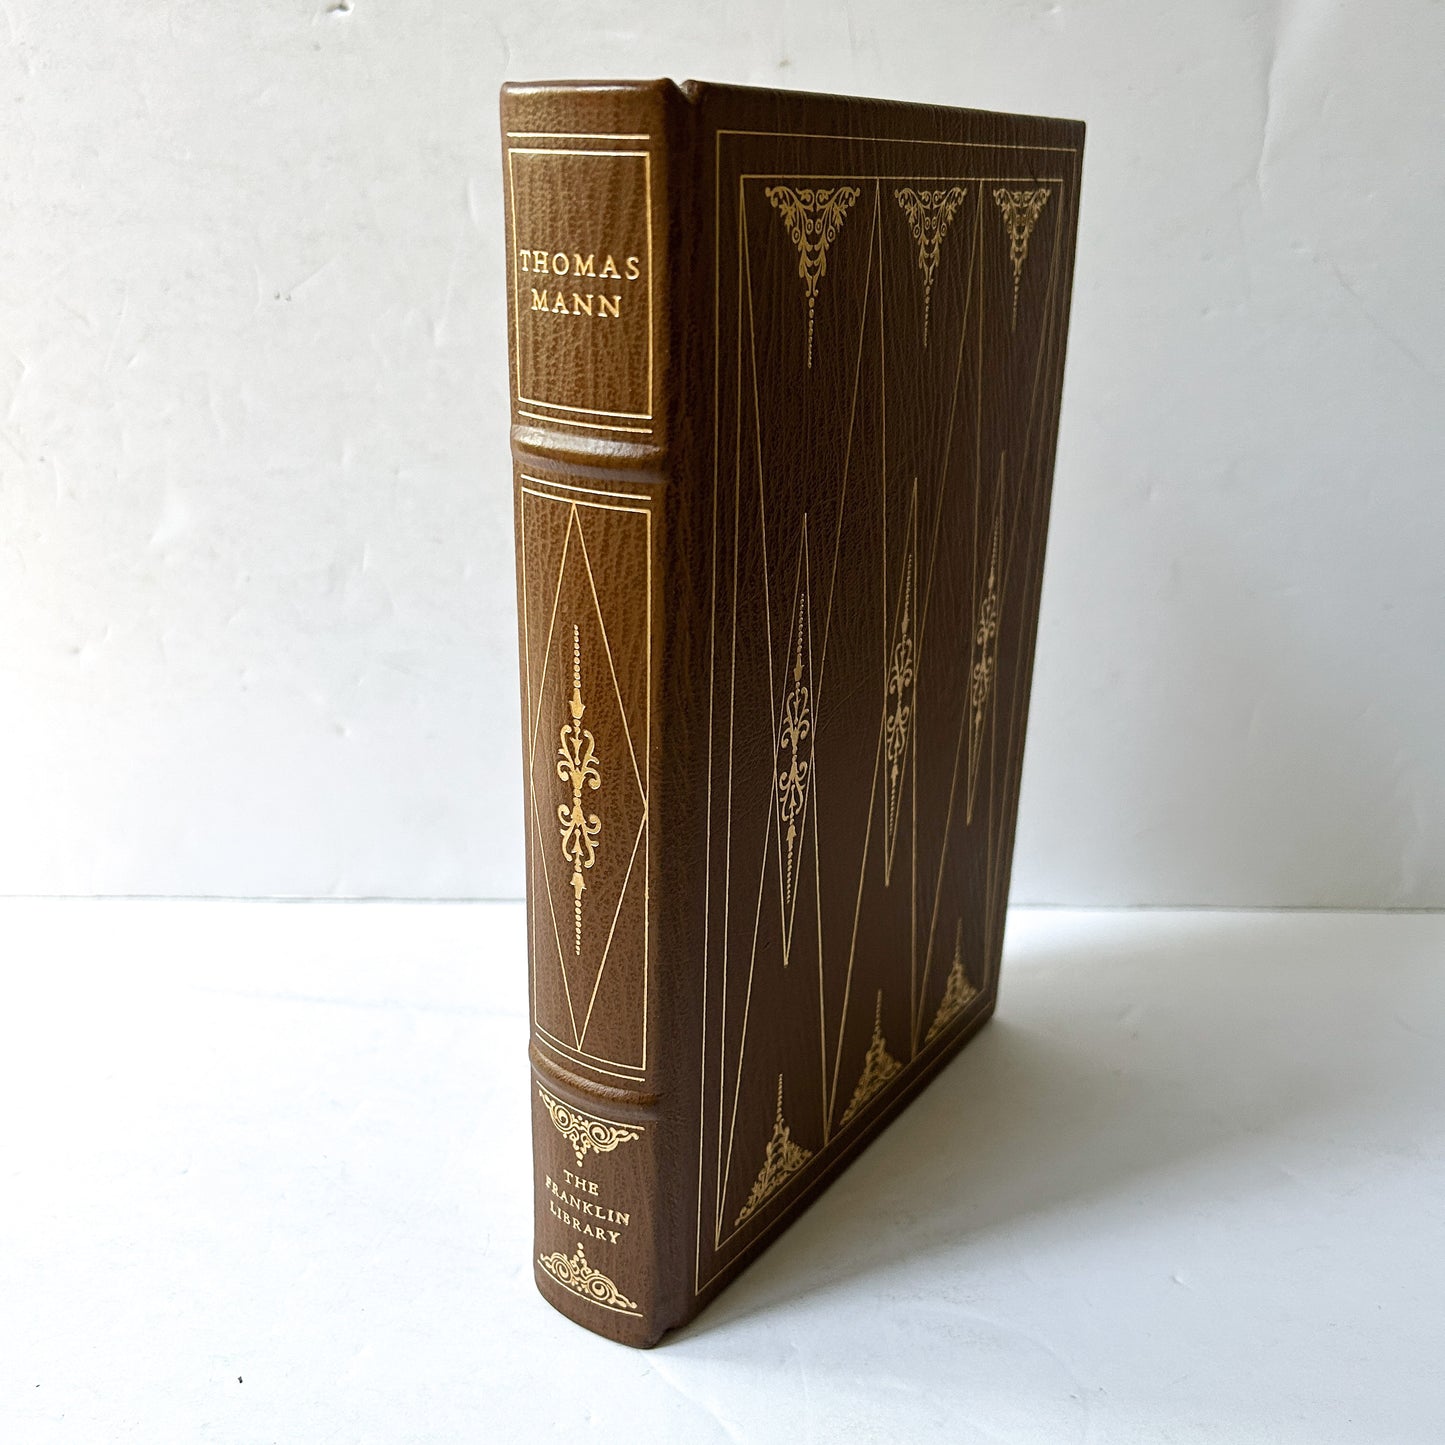 Vintage Thomas Mann Stories, The Franklin Library Limited Edition Book